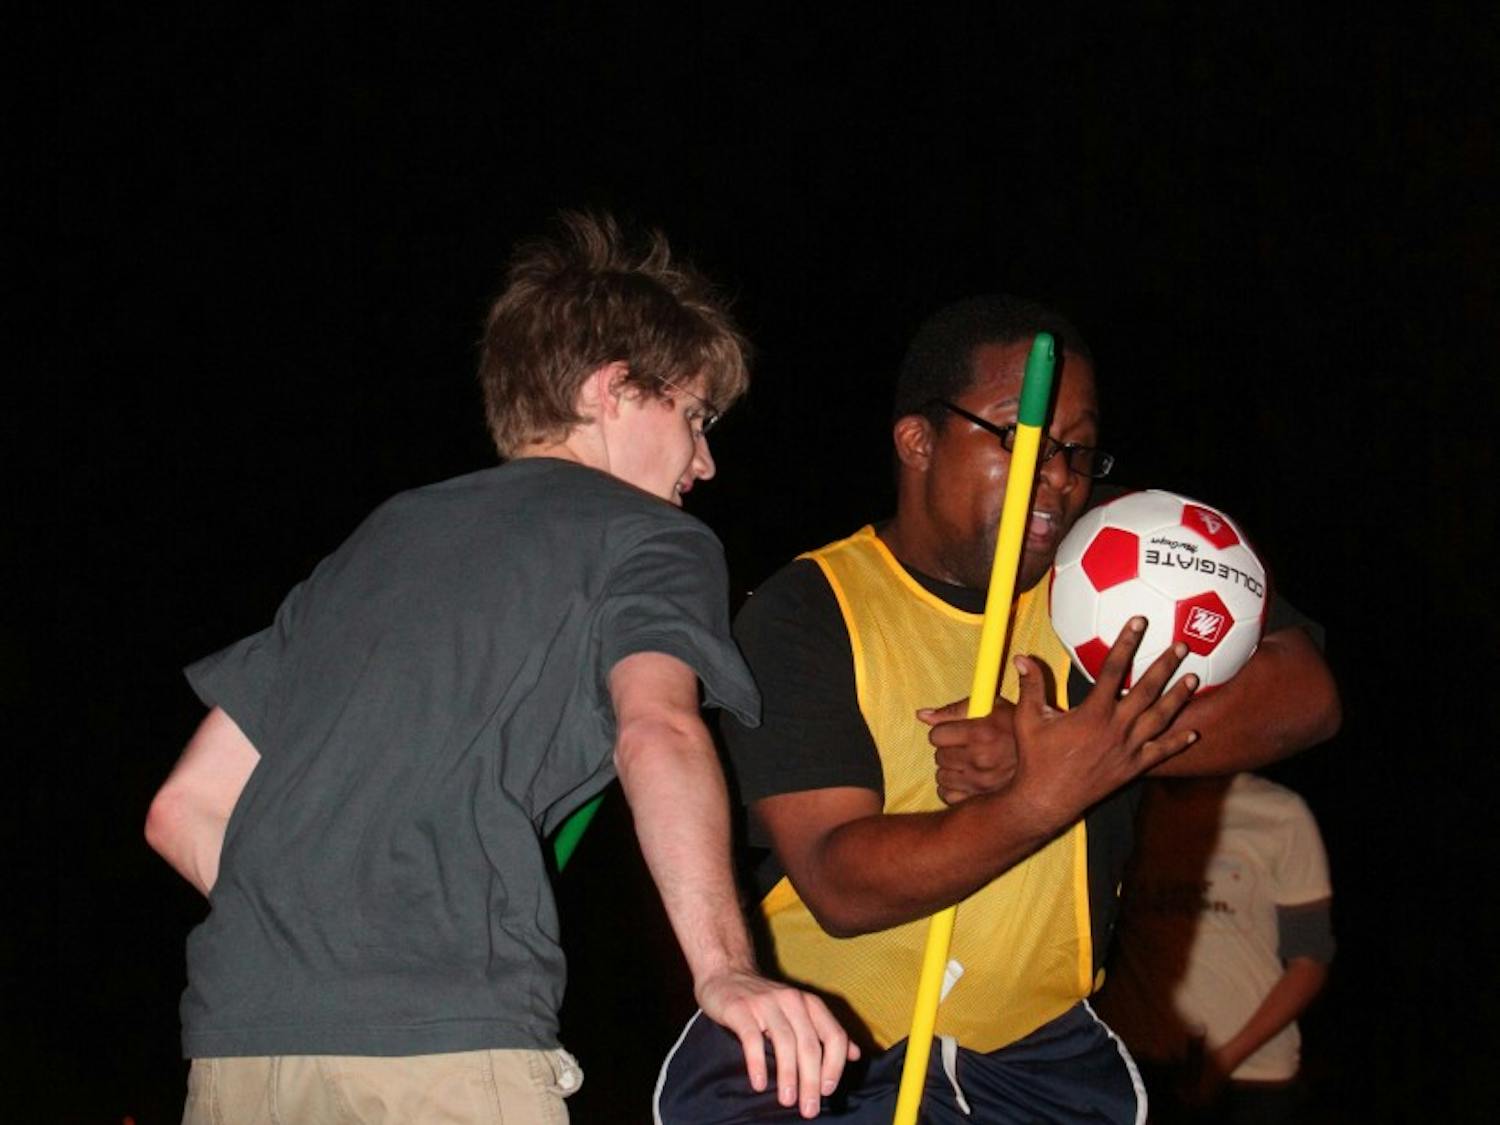 UNC senior Dave Matney (left) guards Stephone White from scoring during a practice for the Chapel Hill Quidditch team Monday night.